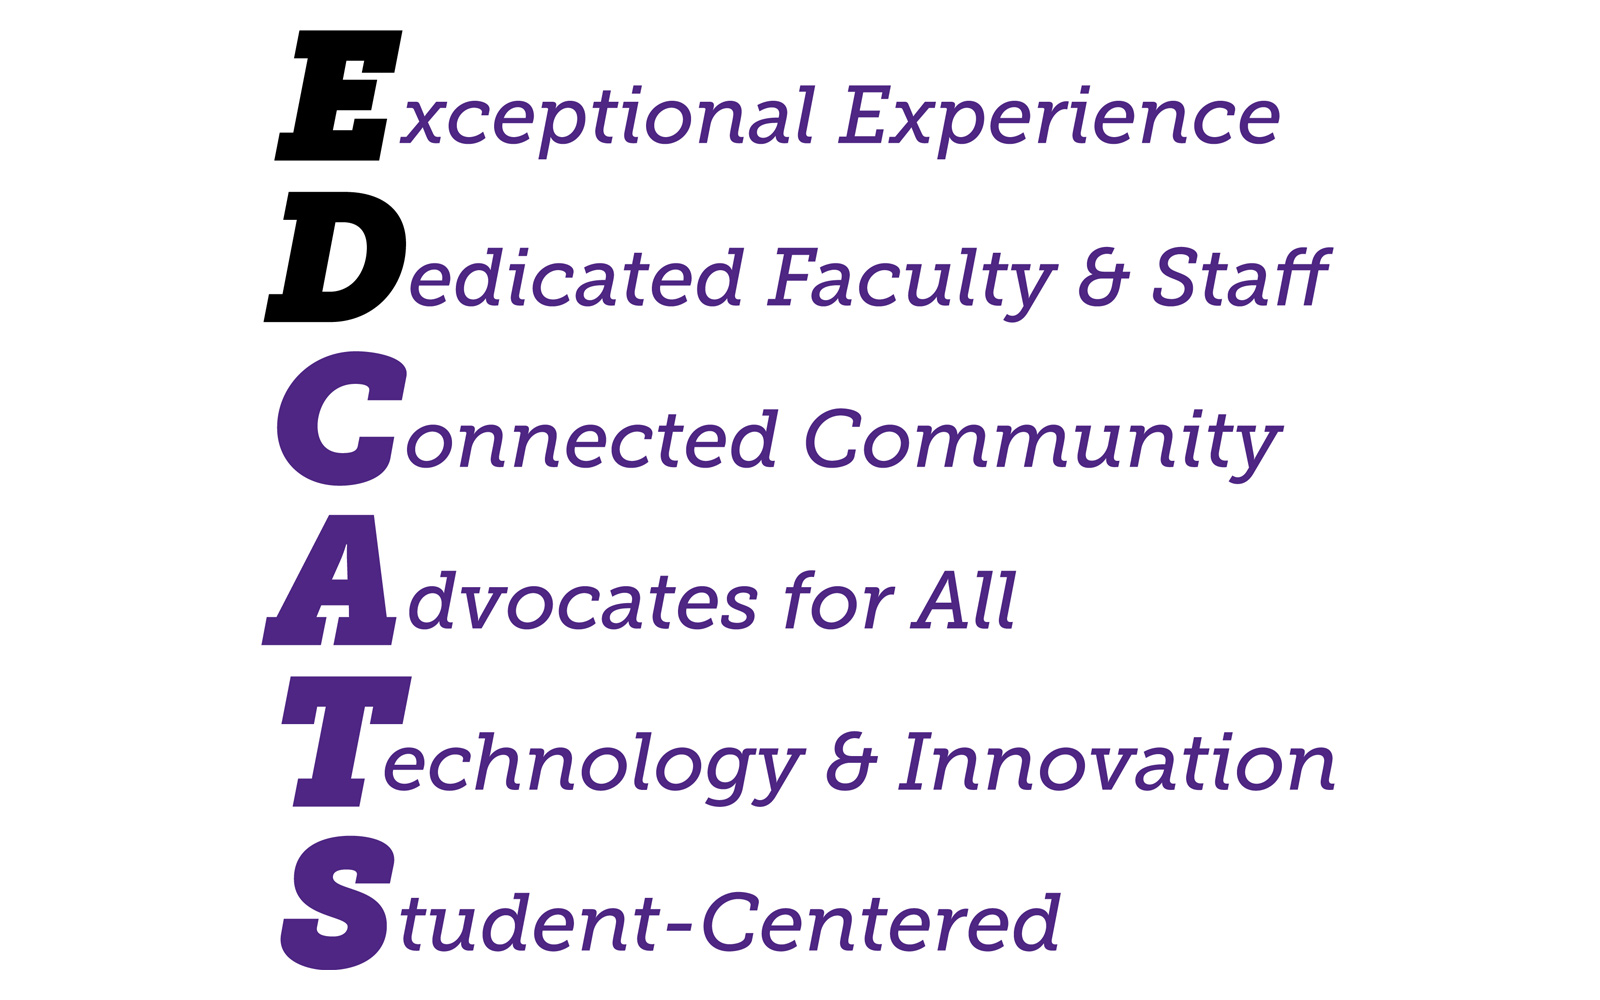 EDCATS = Exceptional Experience, Dedicated Faculty & Staff, Connected Community, Advocates for All, Technology & Innovation, and Student-Centered